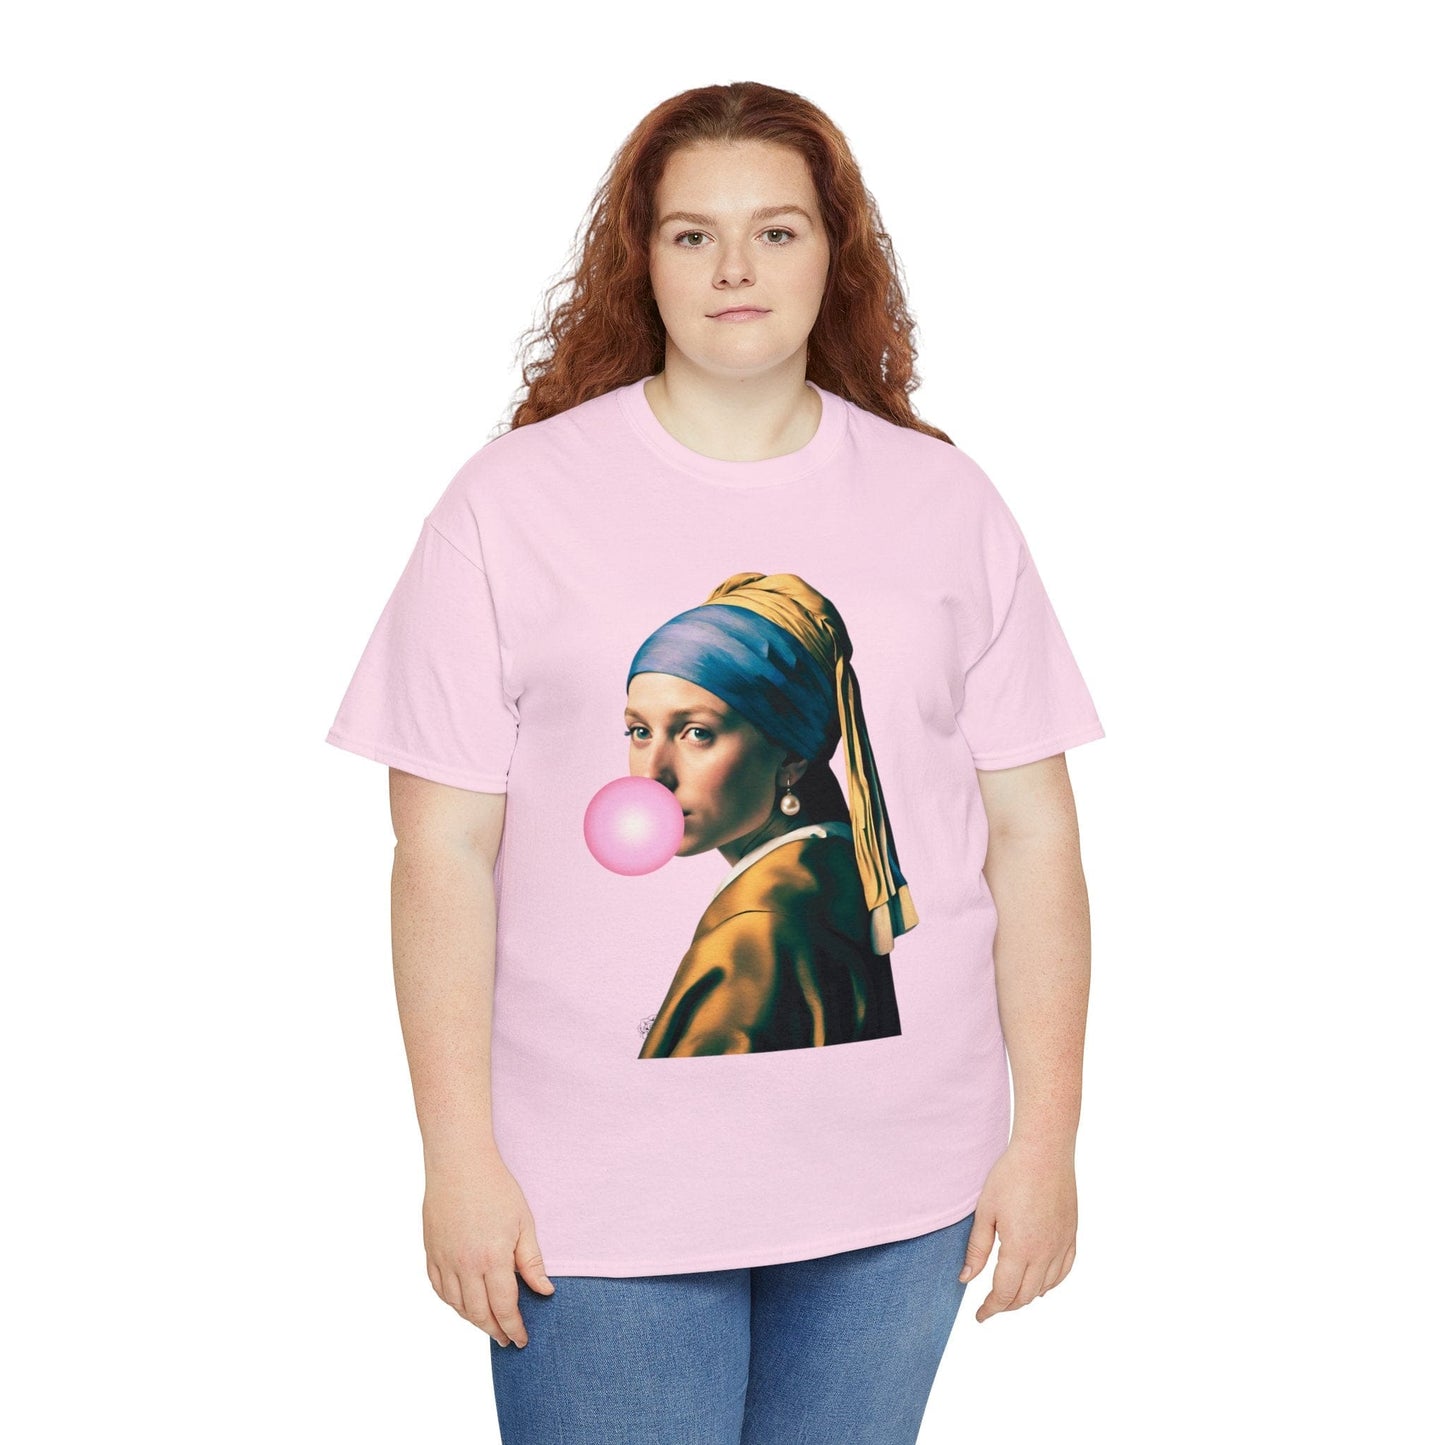 Bubble Gum Girl with a Pearl Earring T-Shirt Aesthetic Shirt Johannes Vermeer Girl with a Pearl Earring T-Shirt Vintage Art Unisex Shirt by Flashlander